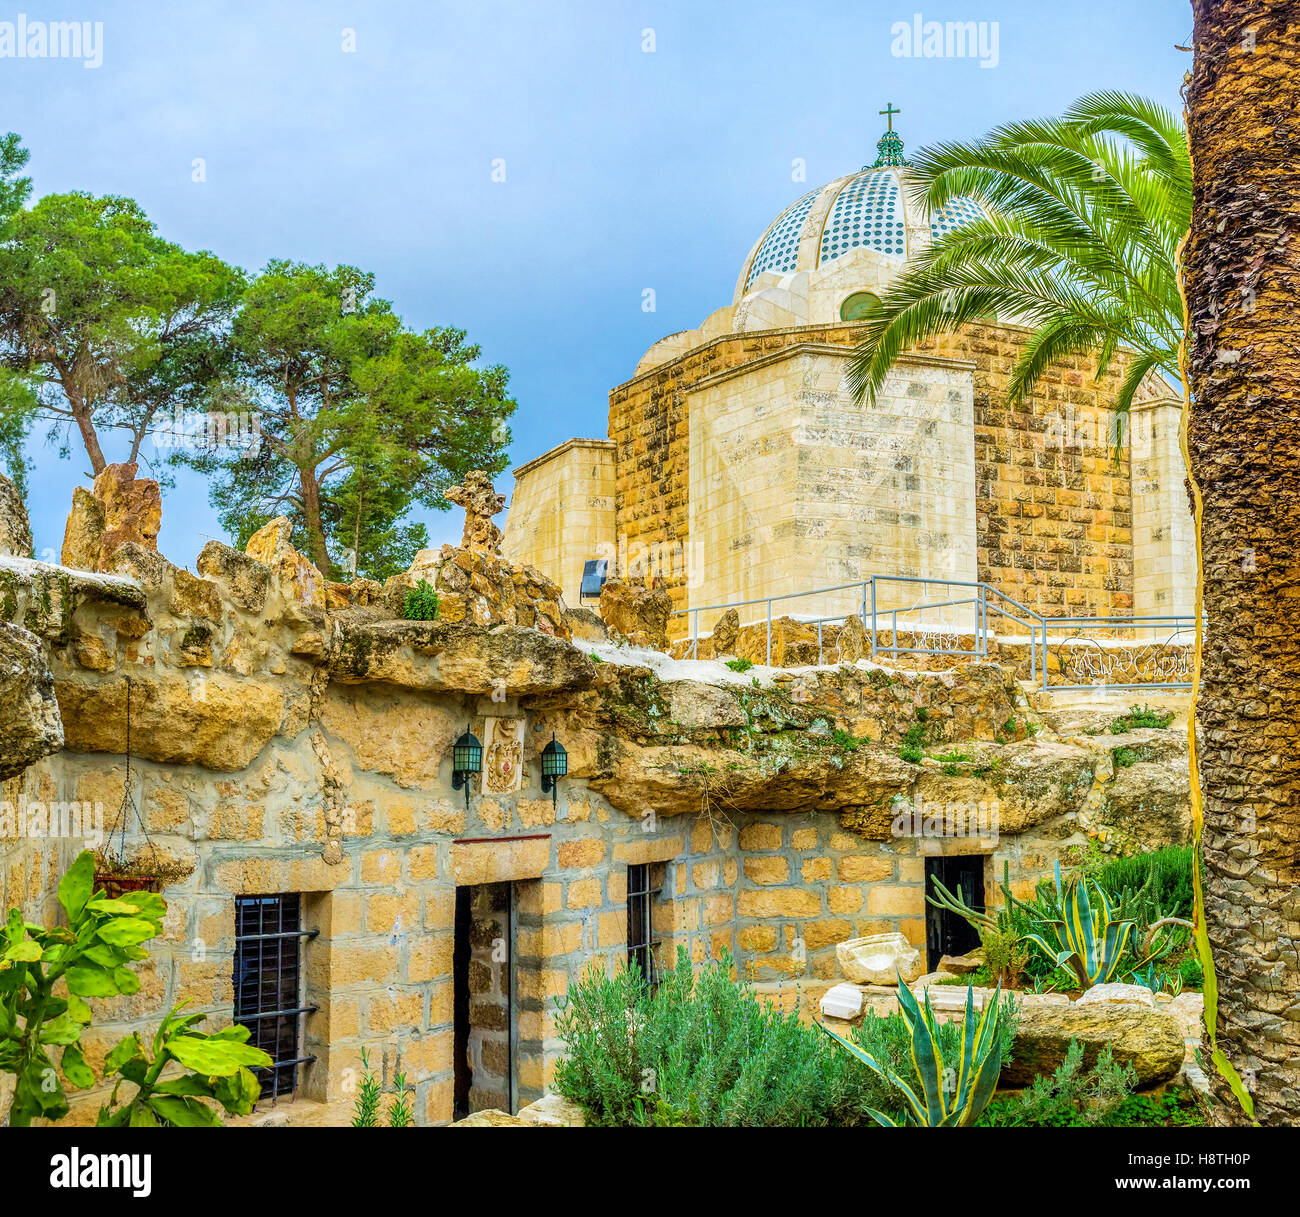 The view on the the Natural Cave Church and the Shepherds Field Chapel, the holiest places of the Shepherd's Field, Bethlehem, P Stock Photo